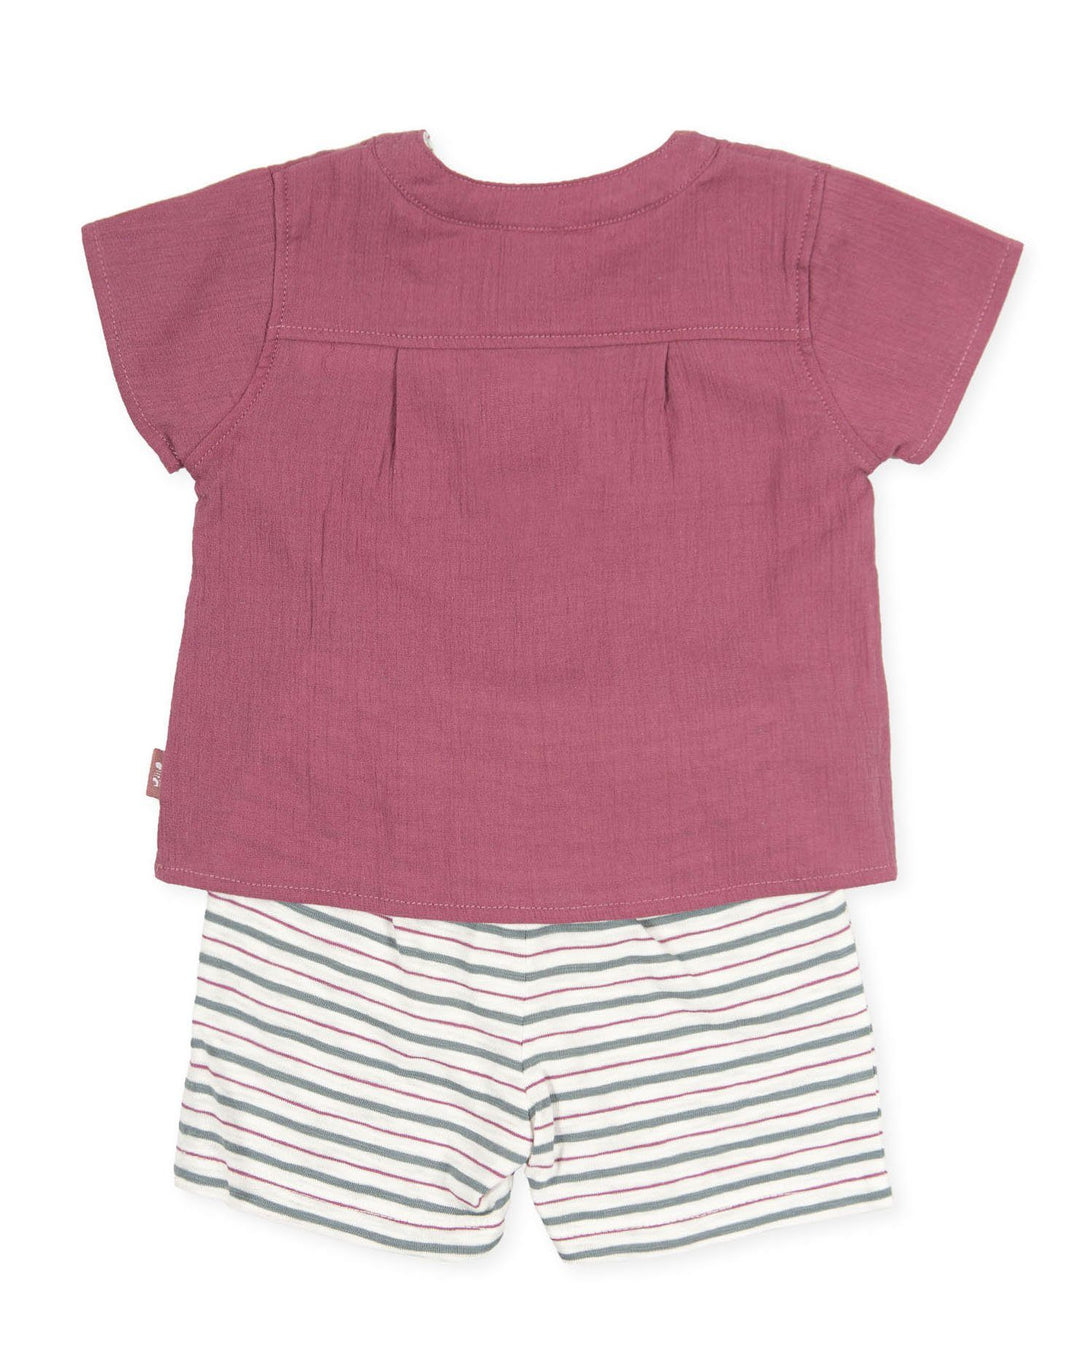 Tutto Piccolo "Zephyr" Plum Cheesecloth T-Shirt & Striped Shorts | Millie and John